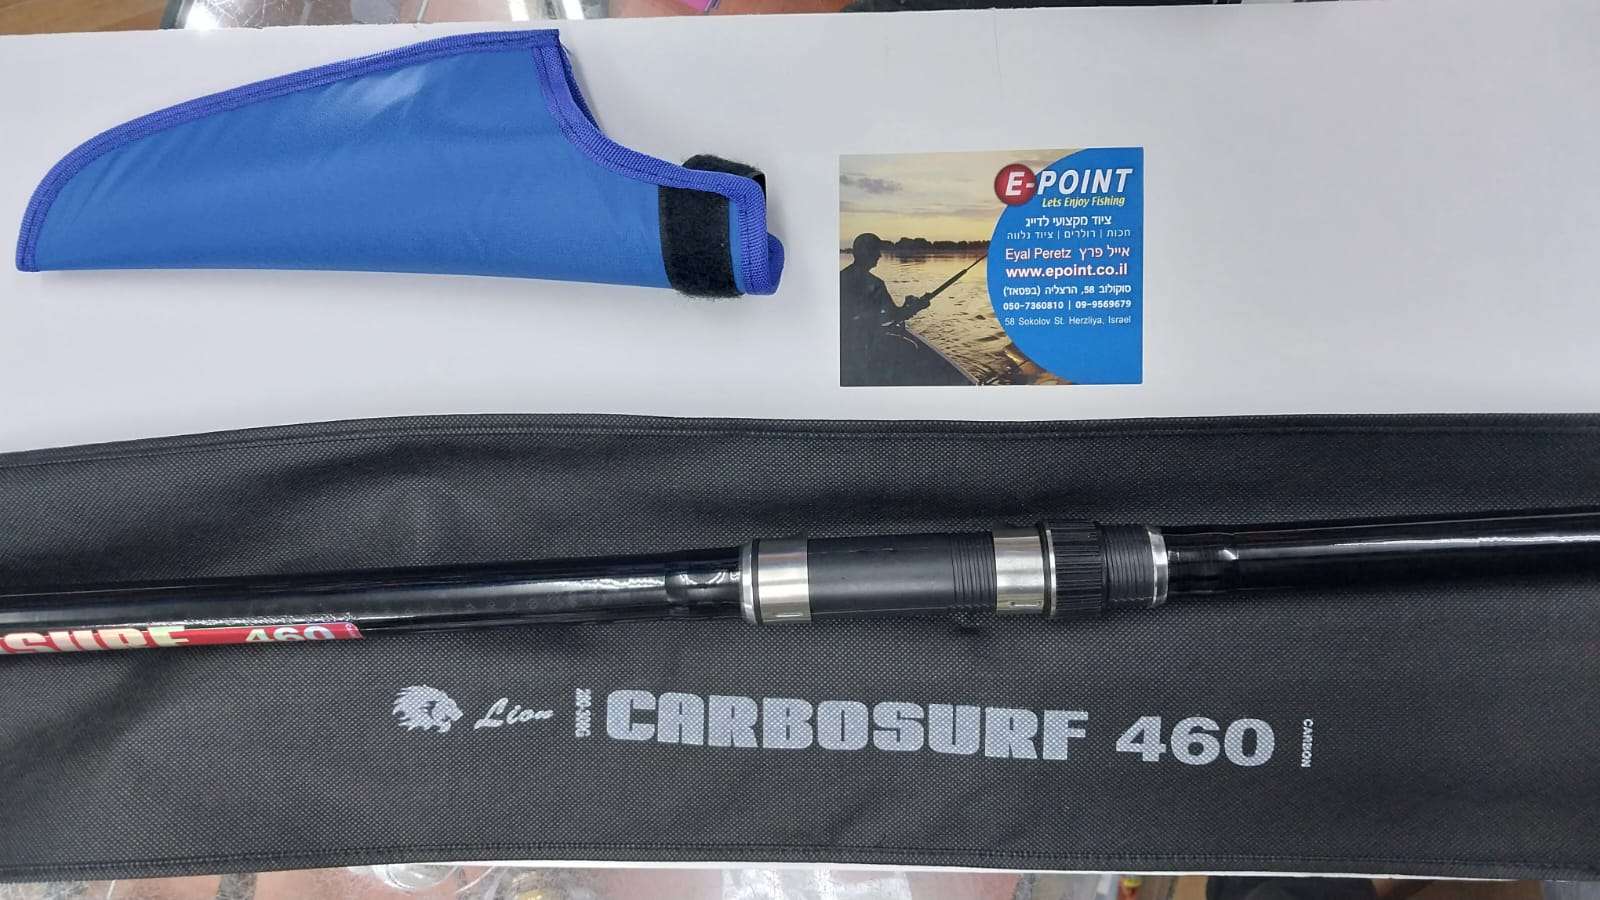 LOIN CARBO SURF460